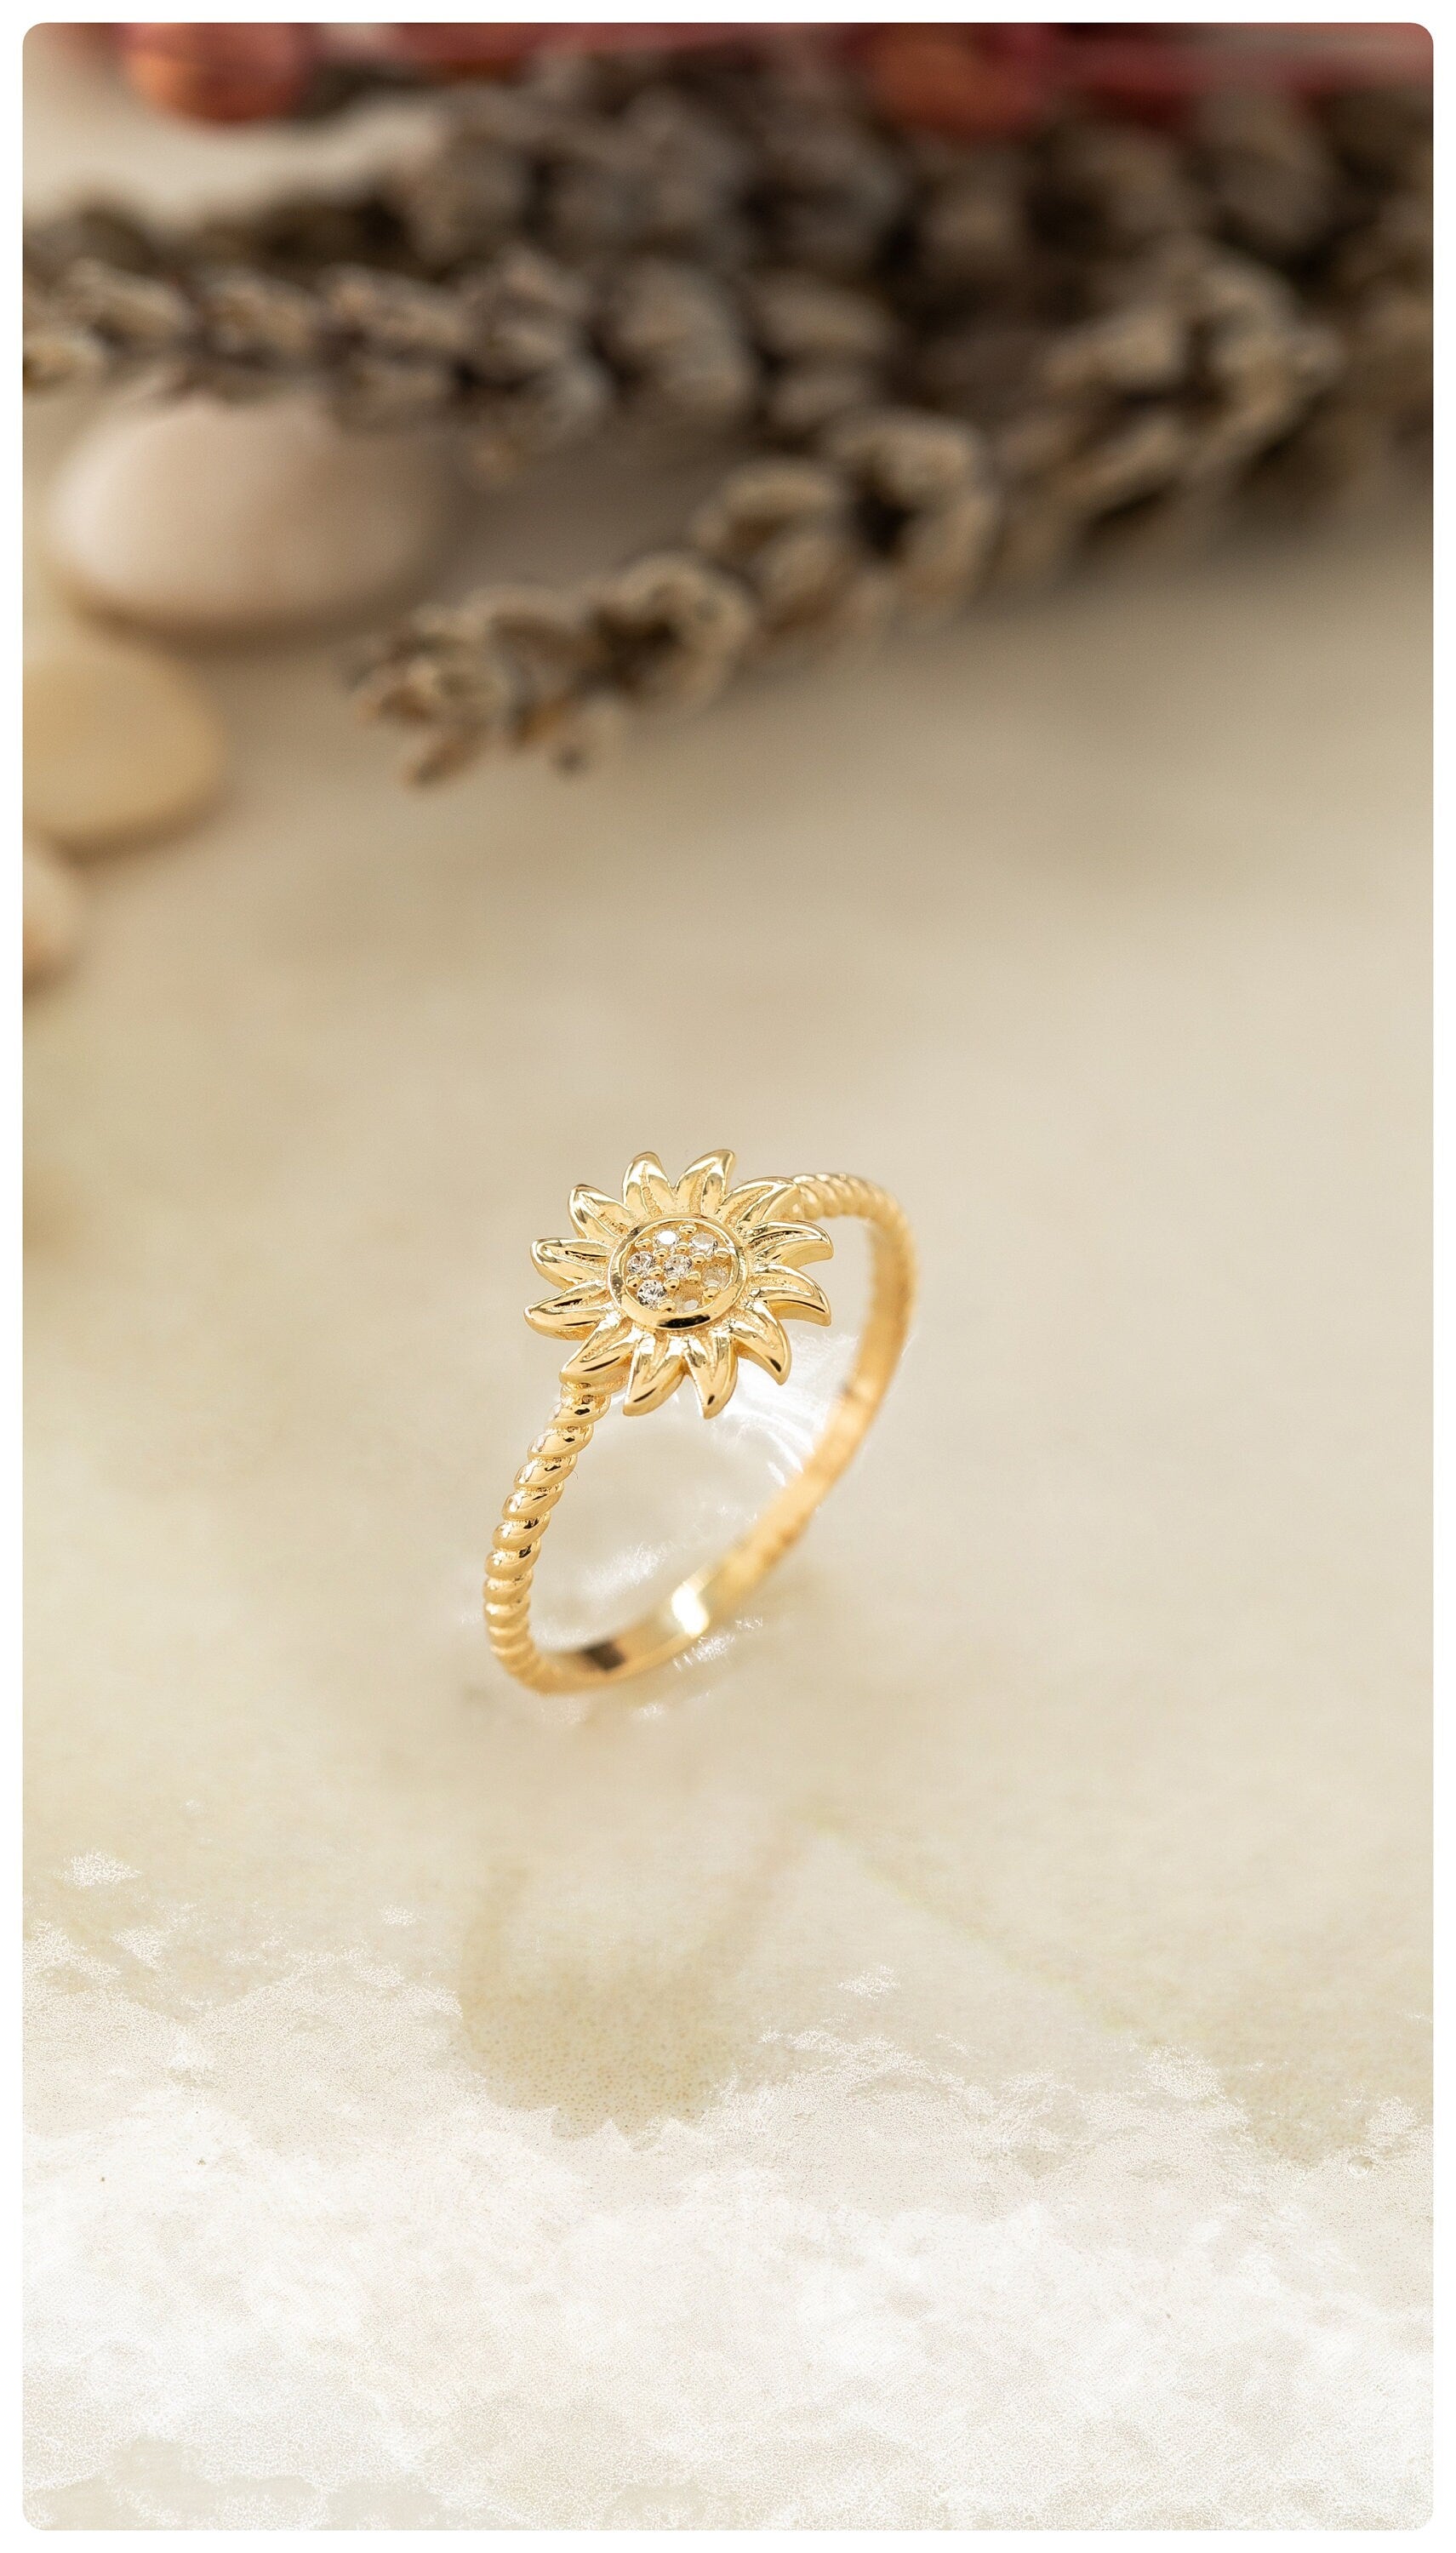 14K Elegant Gold Sunflower Ring 925 Sterling Silver Handmade Floral Jewelry Handcrafted Botanical Jewelry Meaningful Gift for Her